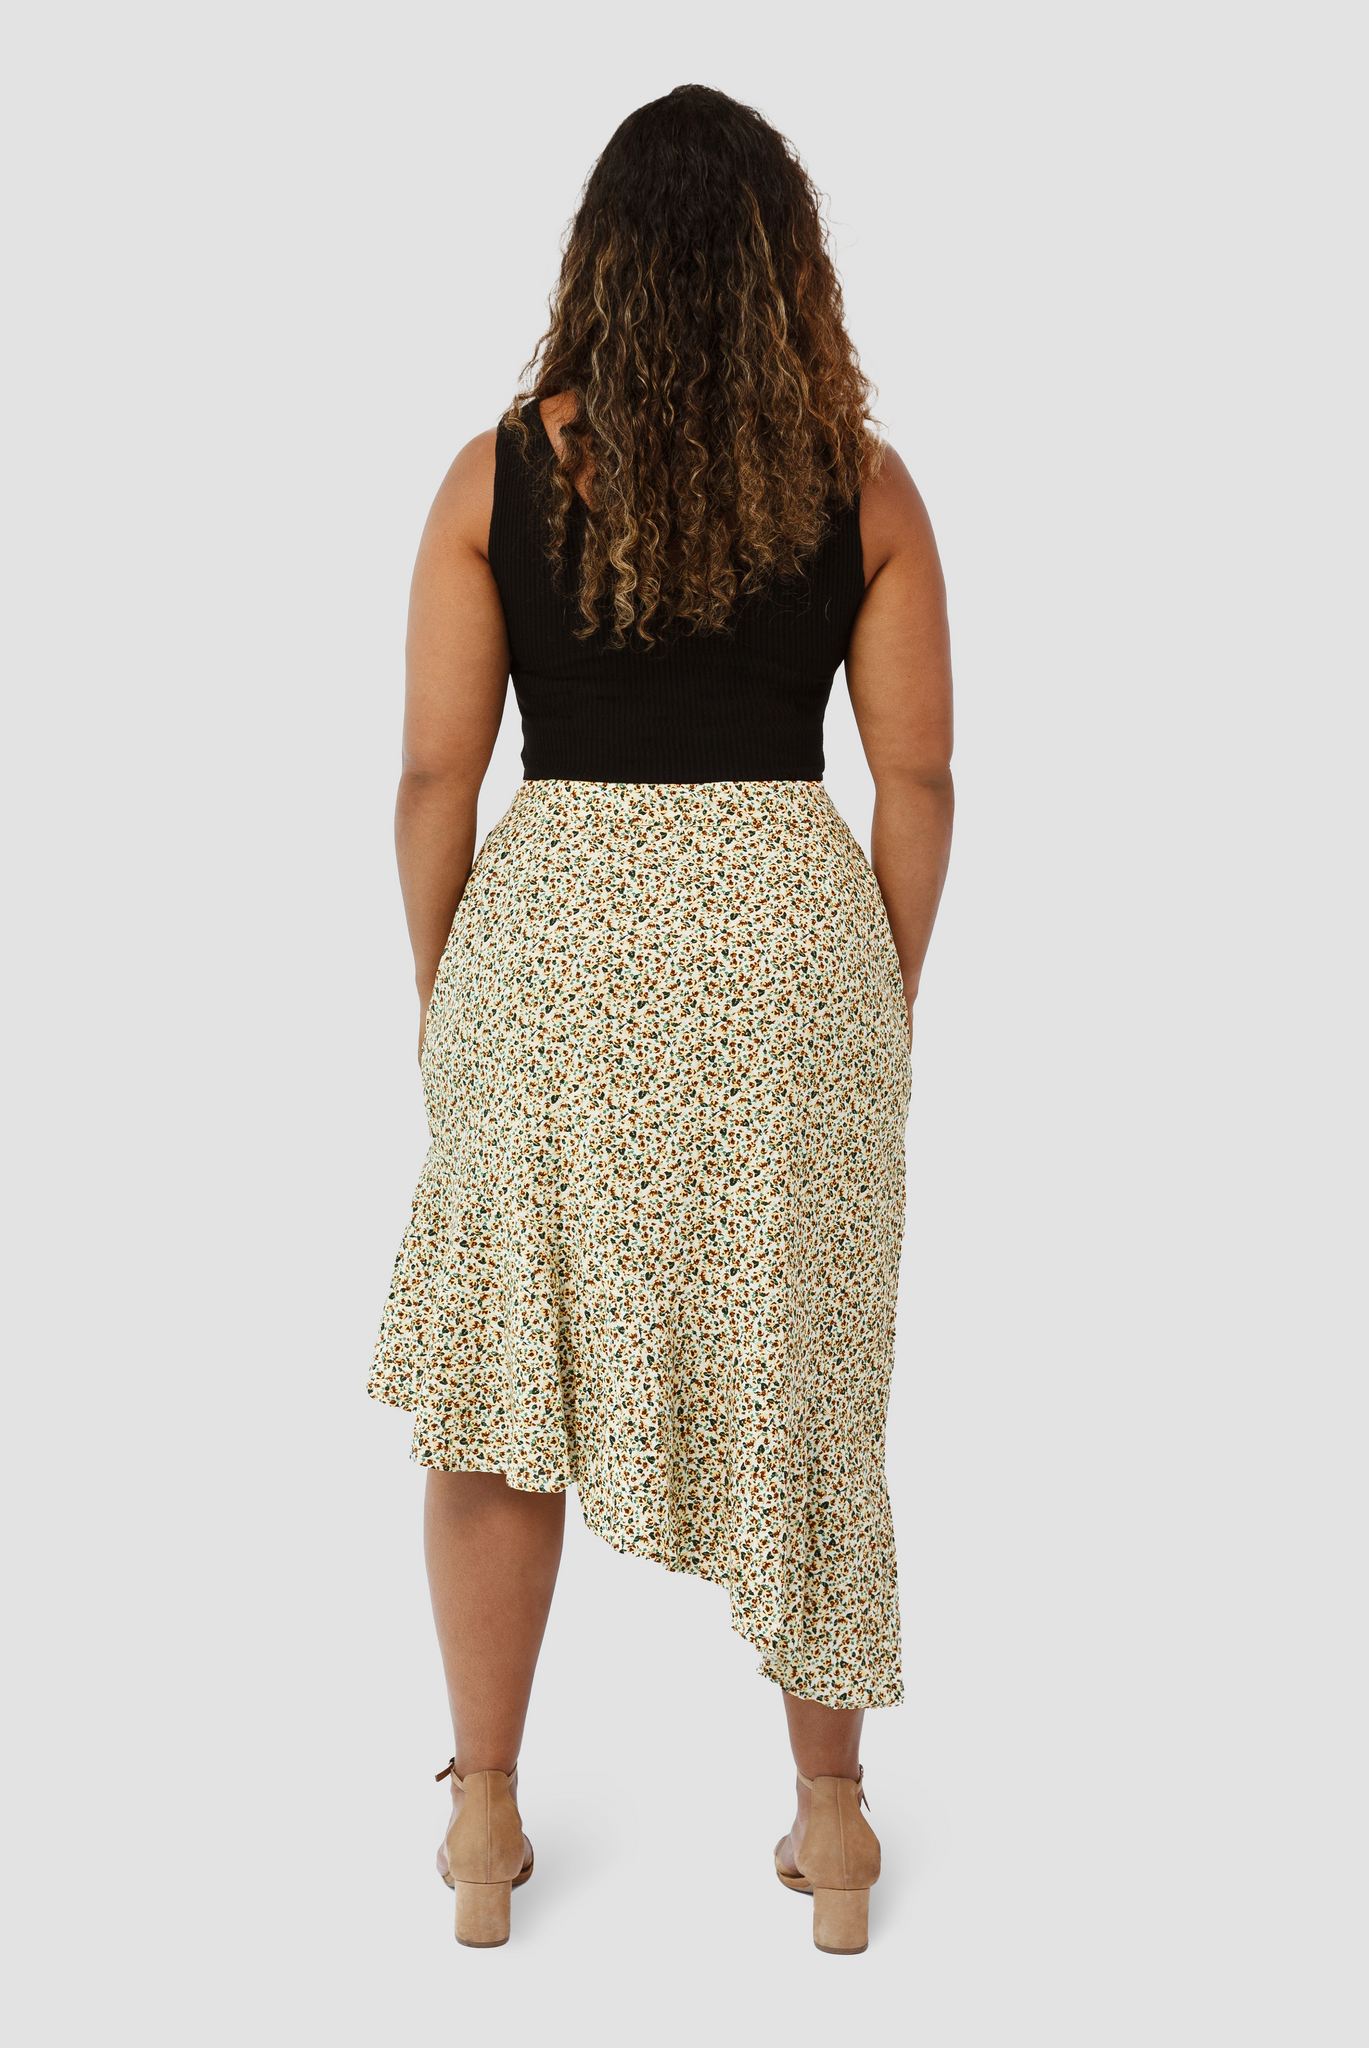 The Cascade Skirt by Aam is designed to sit snug at the waist with more room for full hips and thighs. In this image you can see the back view.